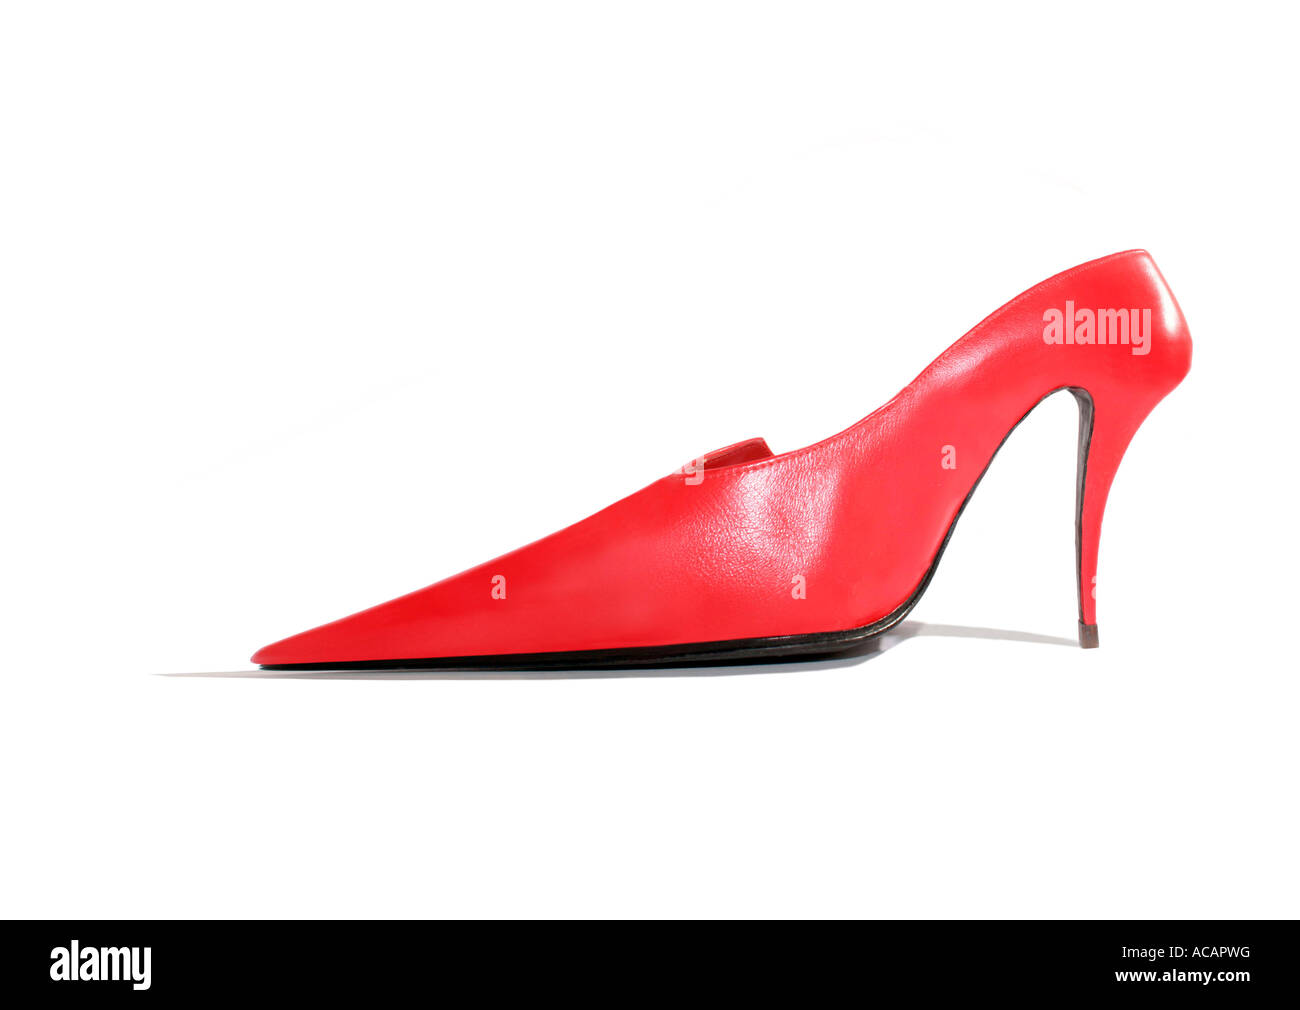 Red lady's shoe Stock Photo